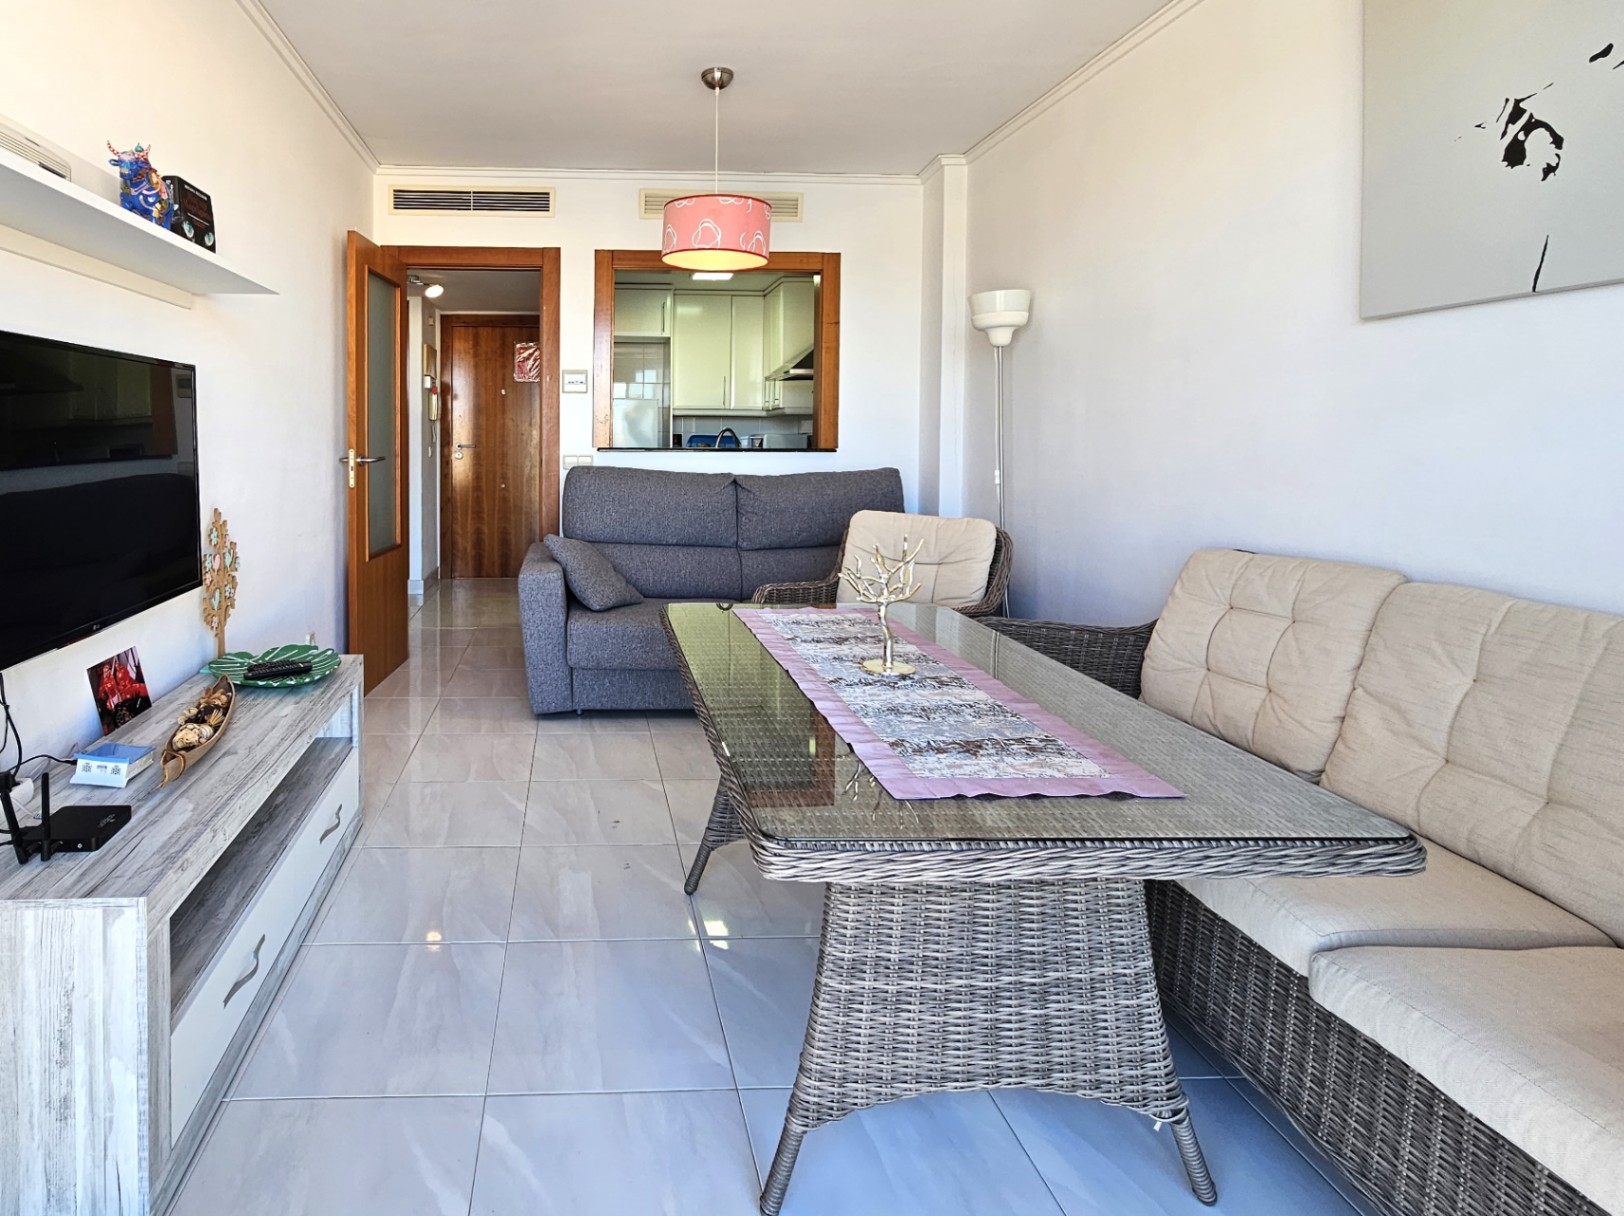 APARTMENT NEAR THE BEACH OF CALPE WITH BEAUTIFUL VIEWS OF THE SEA AND THE PROMENADE